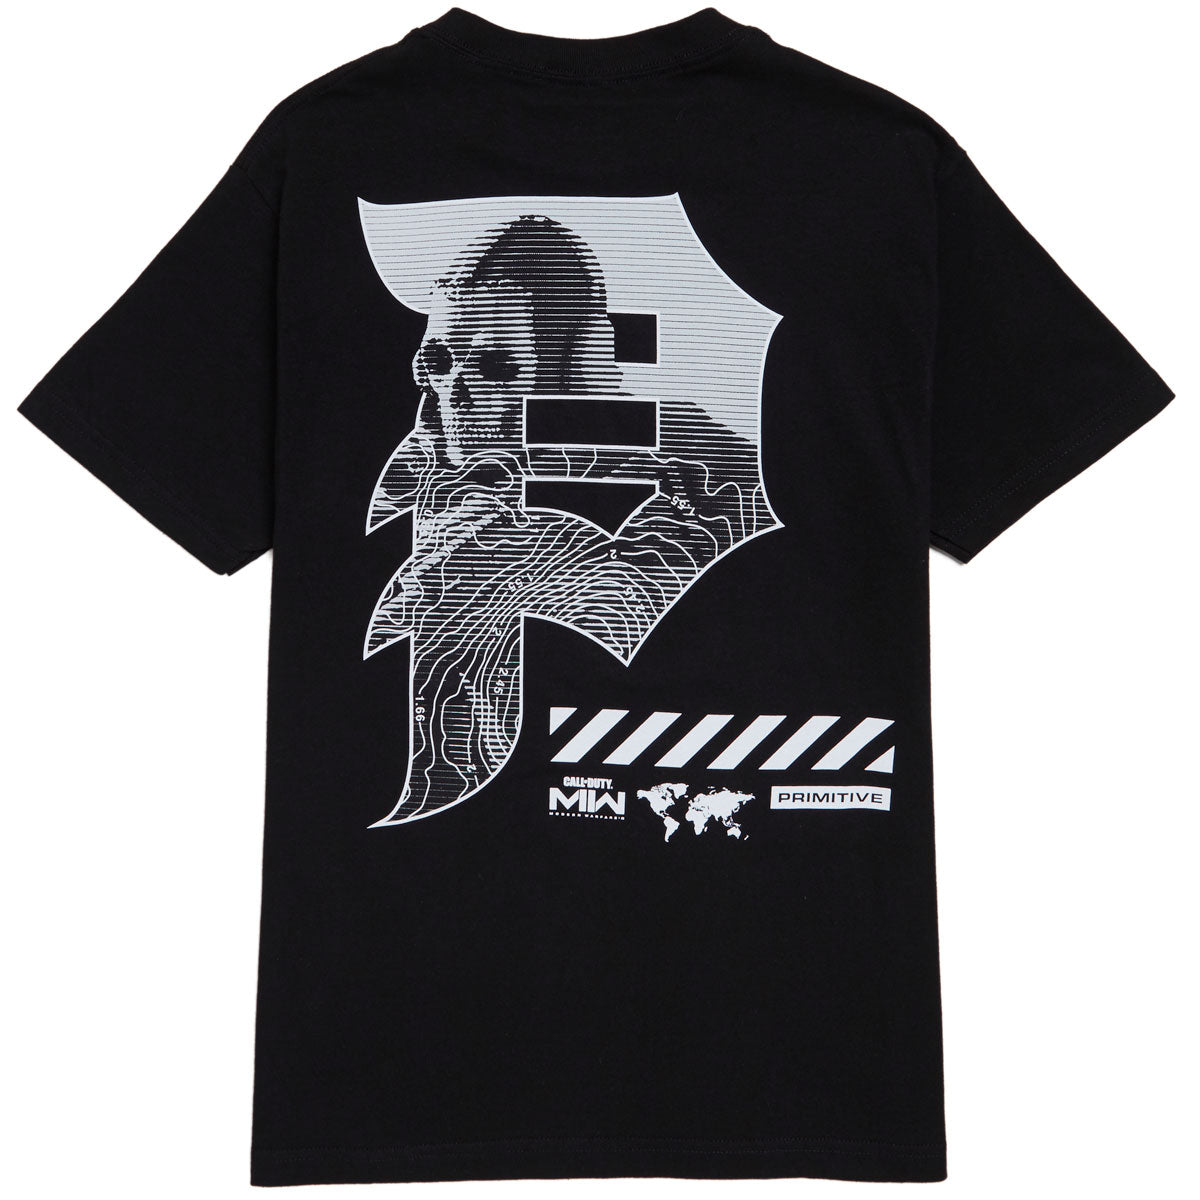 Primitive x Call Of Duty Mapping Dirty P T-Shirt - Black image 2